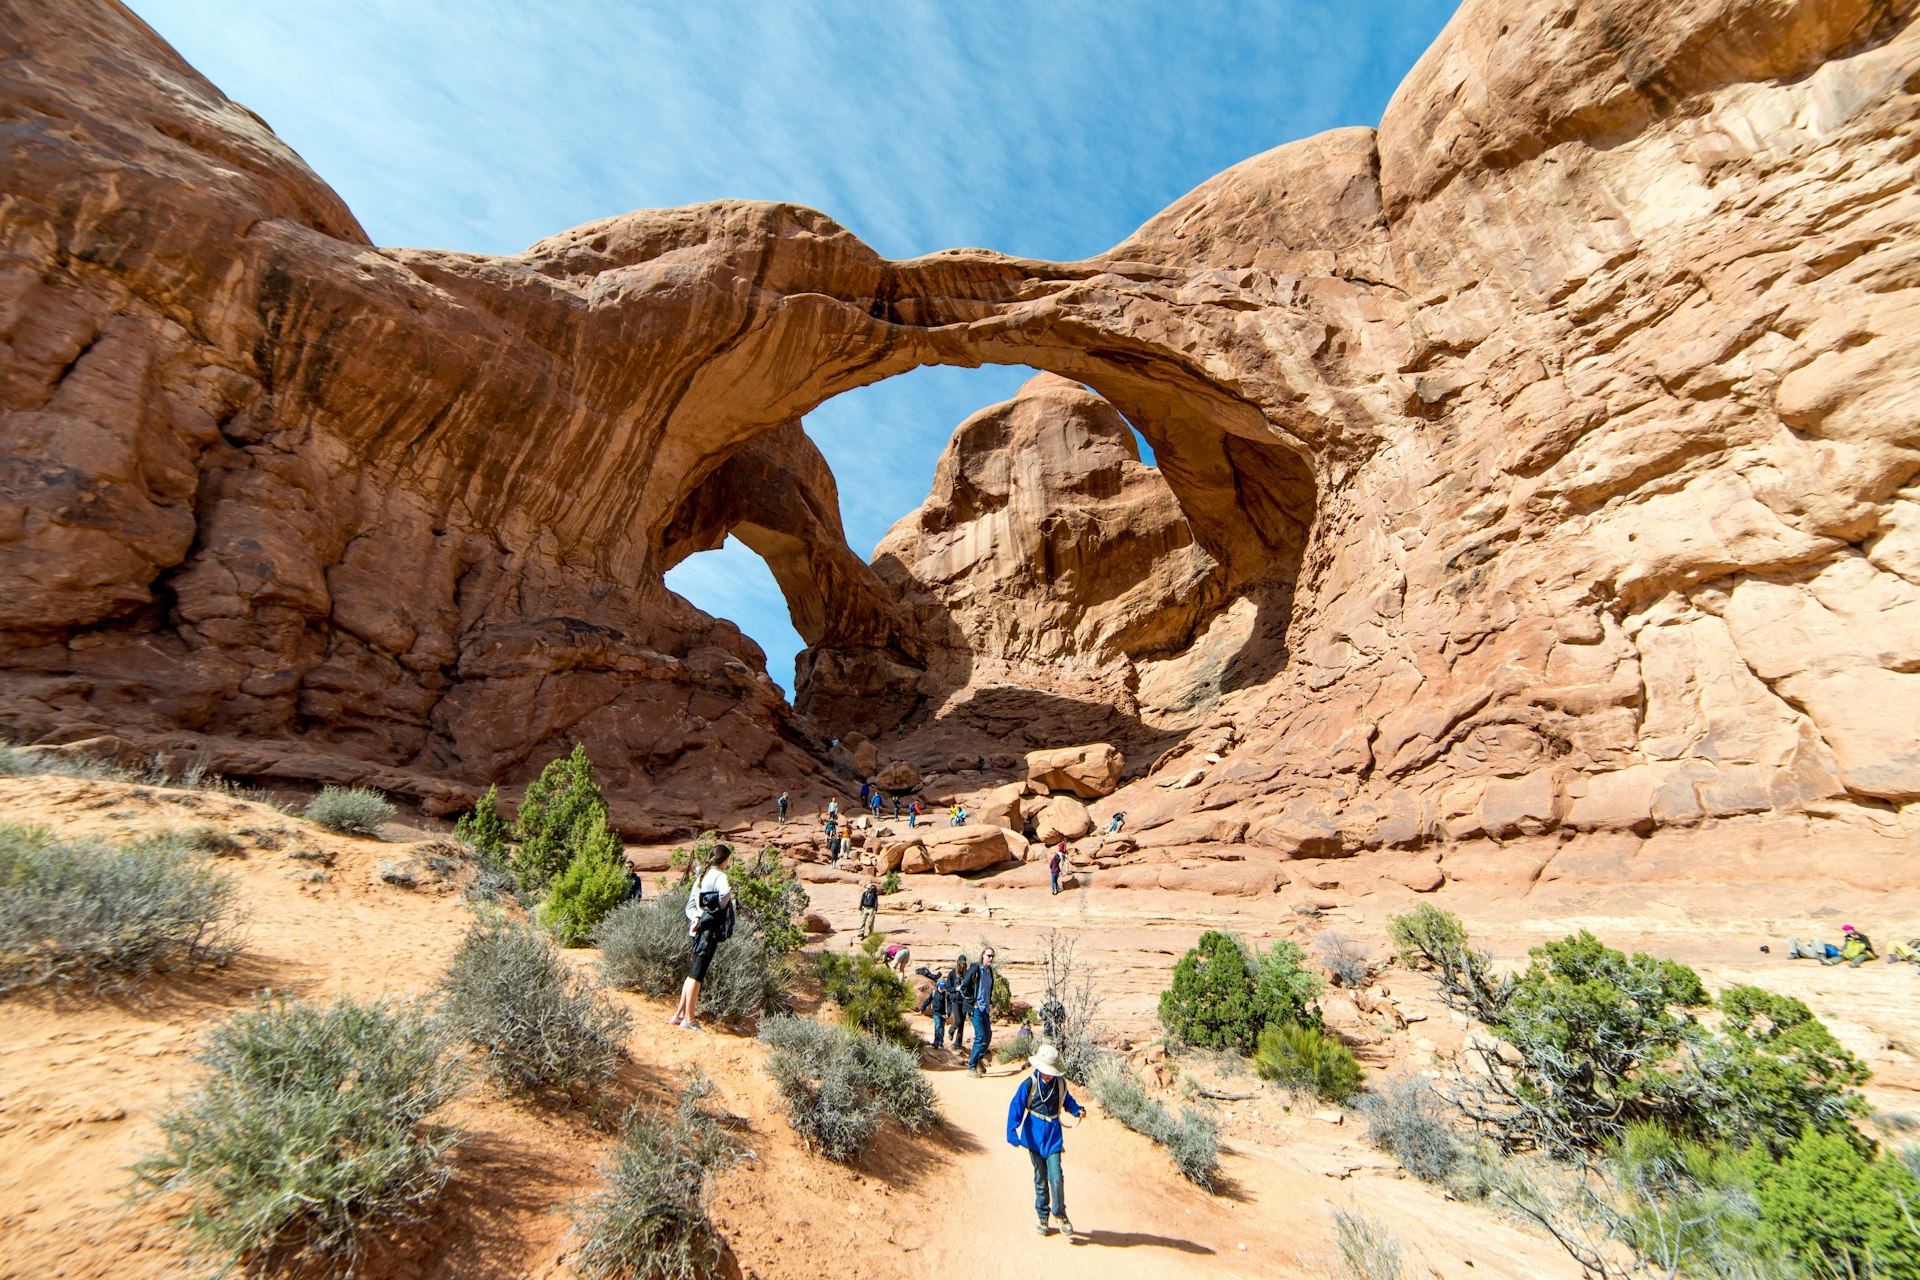 Double Arch in Arches National Park with people